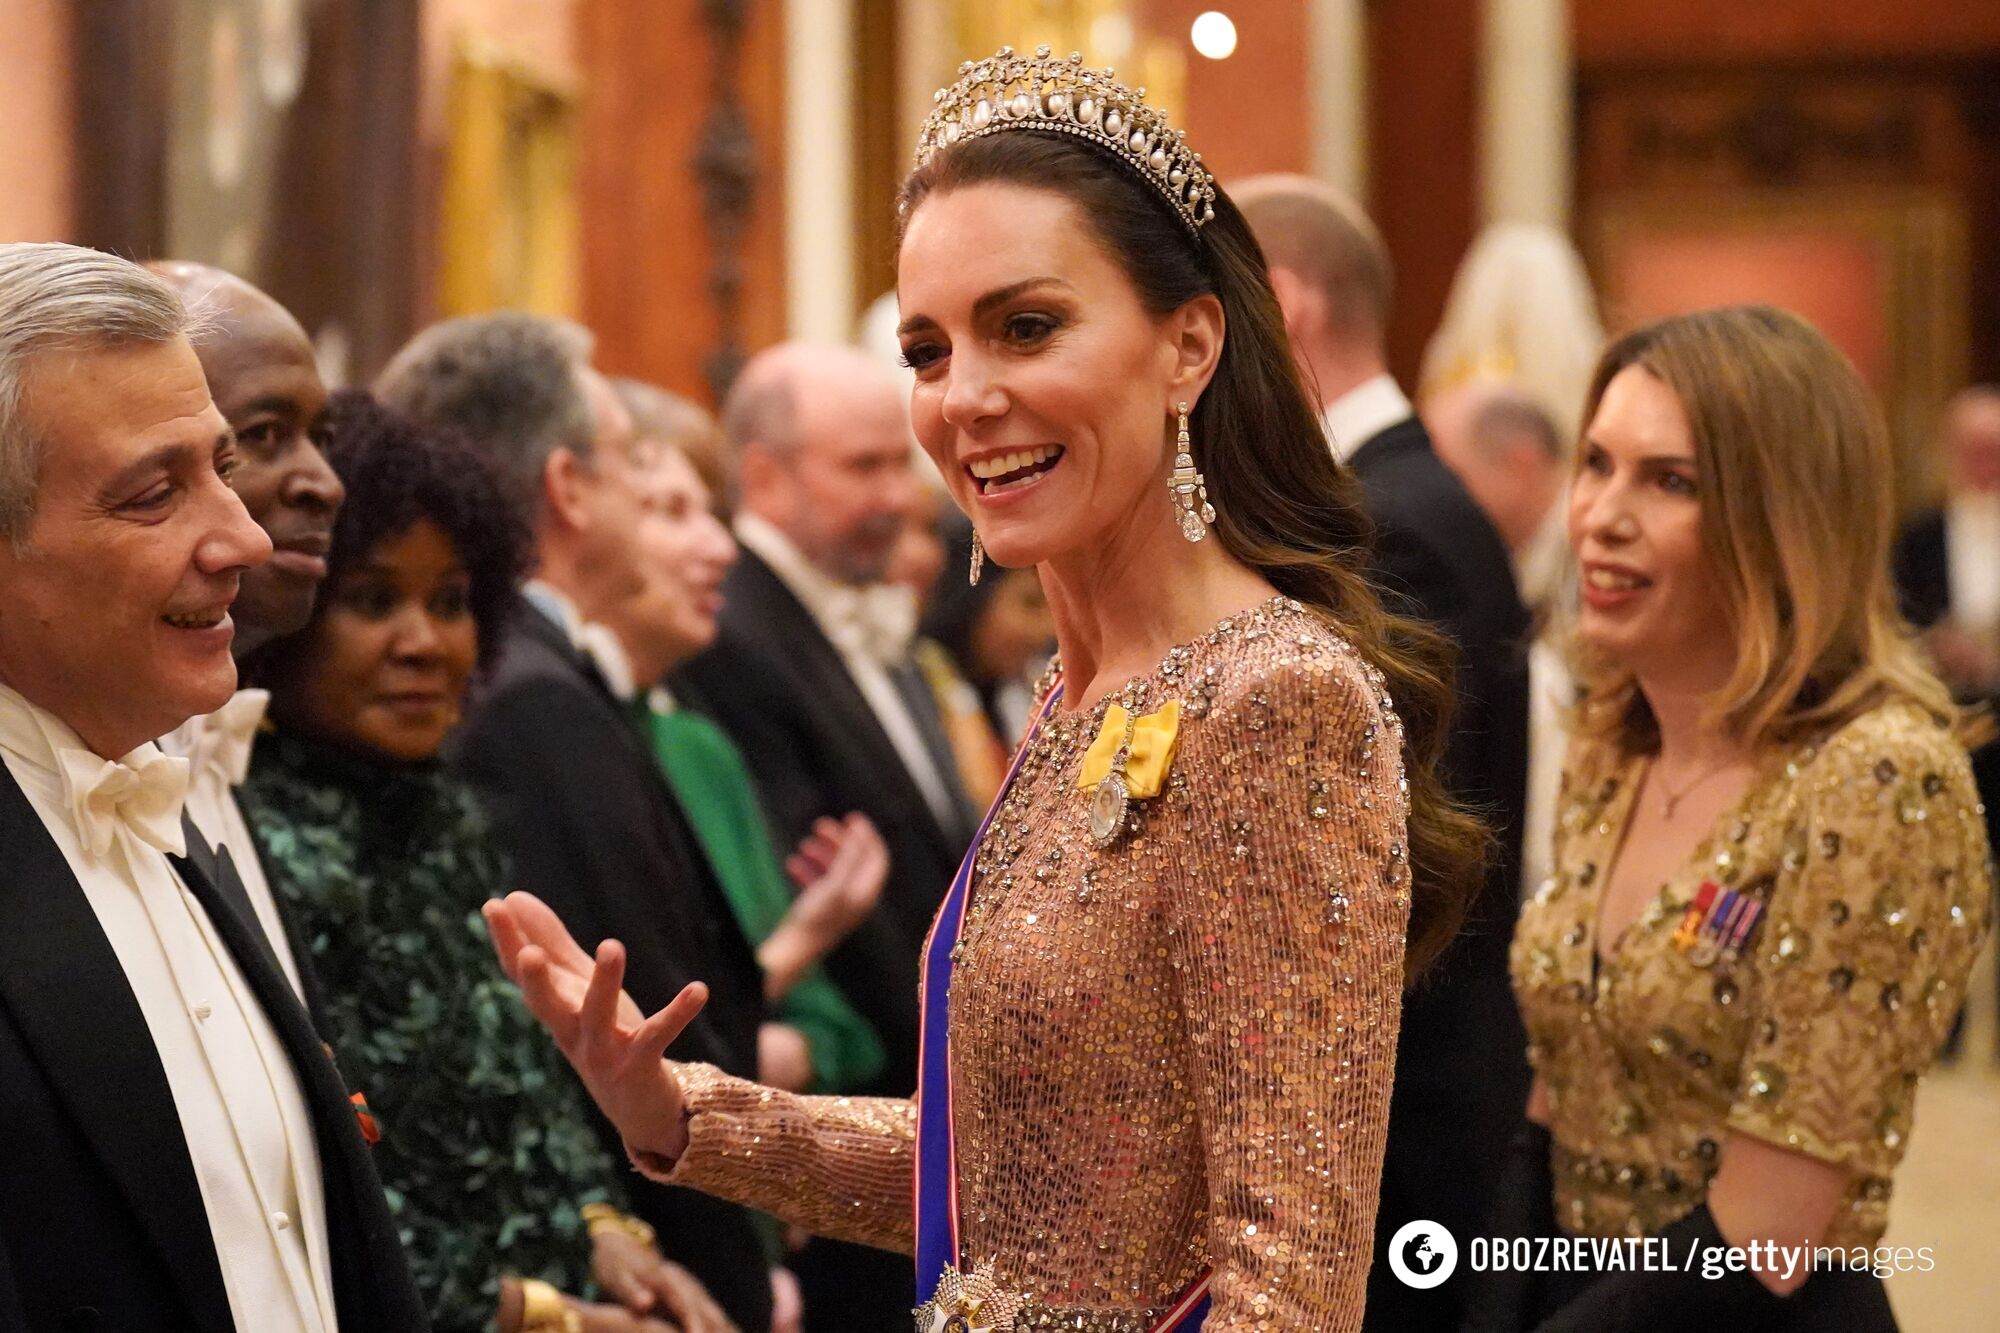 Kate Middleton wore a ''revenge dress'' to a diplomatic reception, sending ''greetings'' from Princess Diana